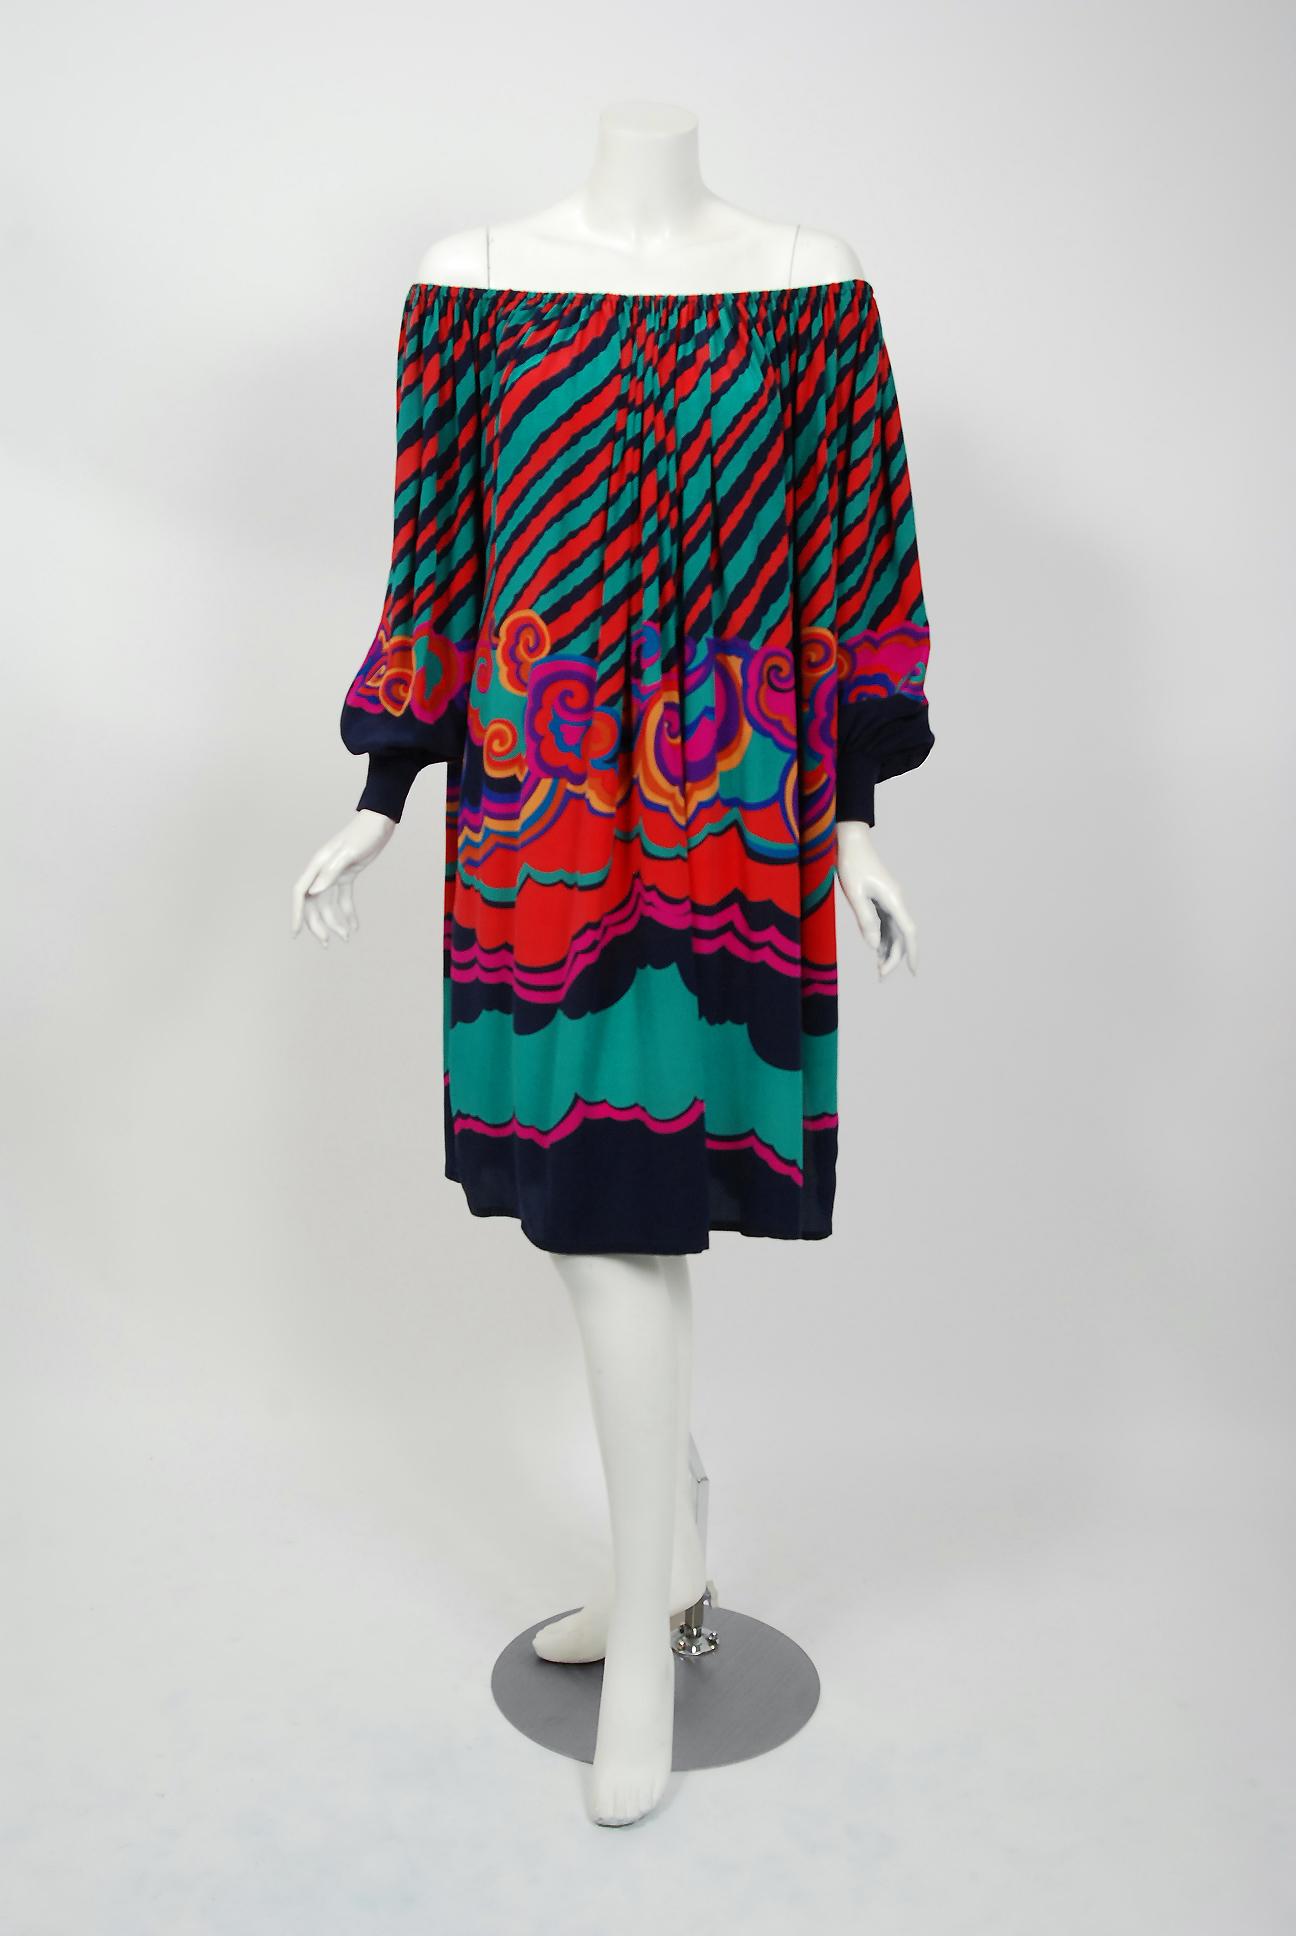 This extremely gorgeous Lanvin Couture graphic swirl print tunic dress, from their 1977 collection, is a statement piece. I love the beautiful mix of colors and bohemian chic vibe. It manifests opulence and makes you feel confident. The figure